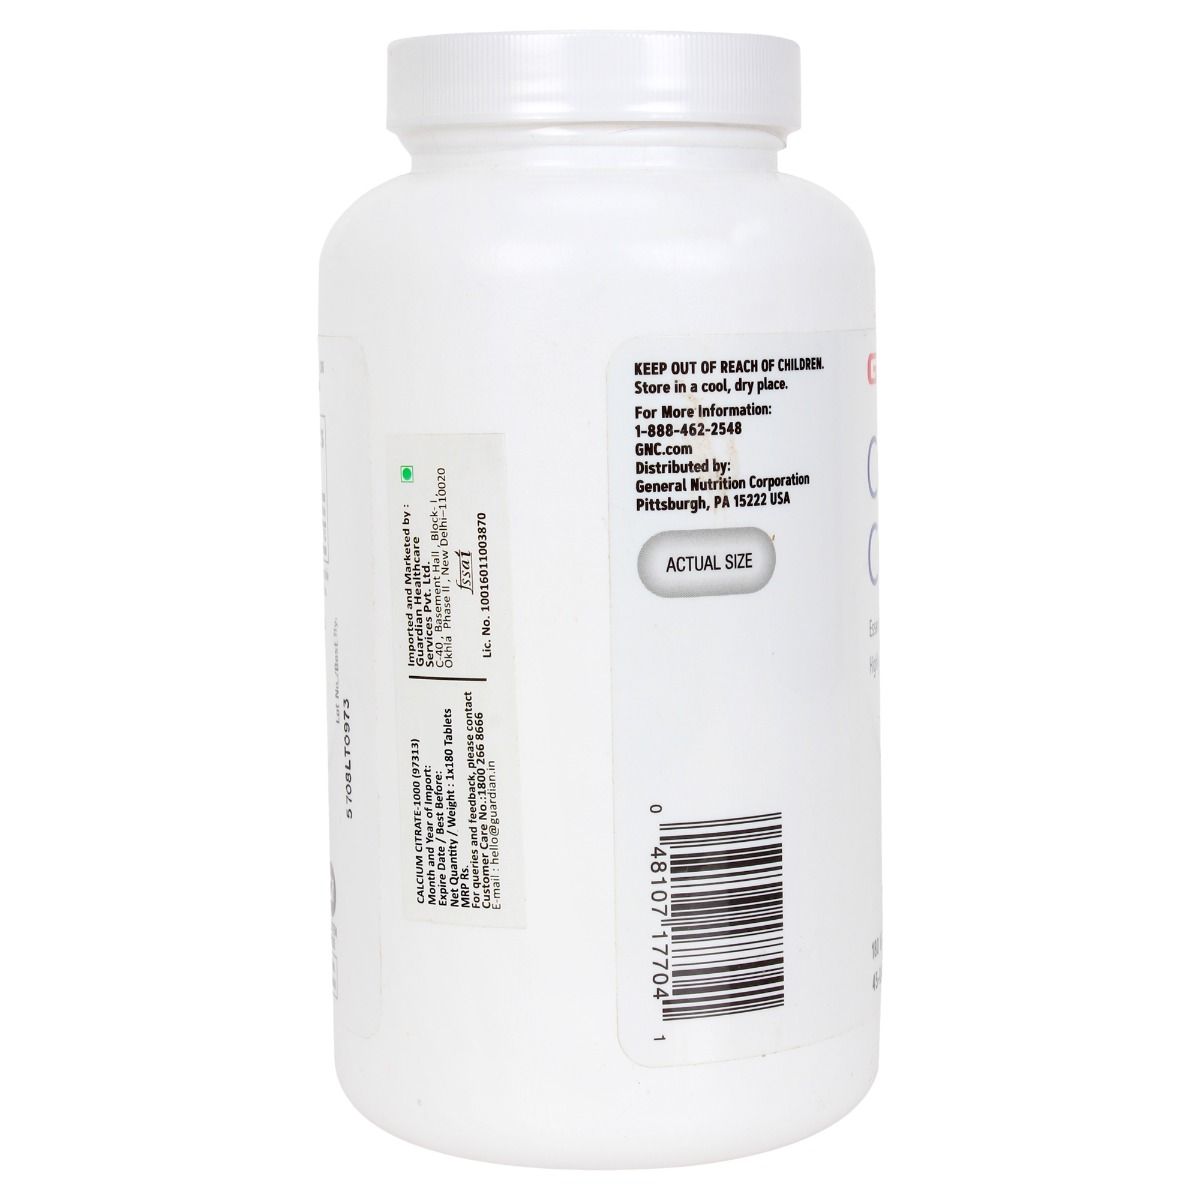 GNC Calcium Citrate 1000mg - Most Absorbable Form of Calcium for Stronger Bones - 